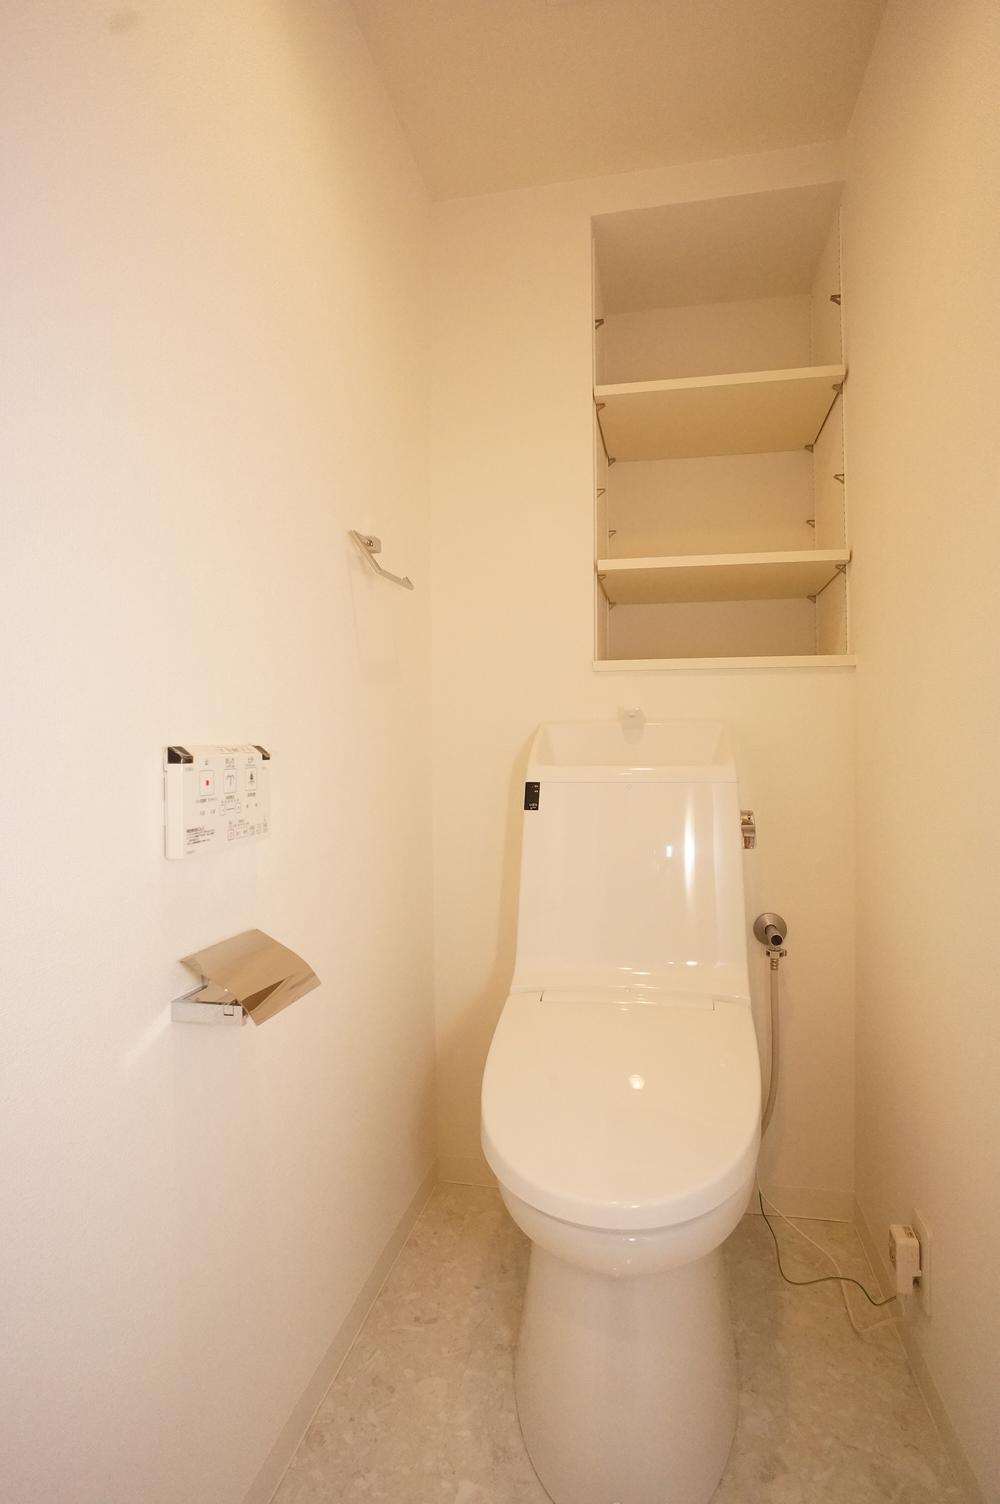 Toilet. Shower toilet specification! There is also a storage shelf!